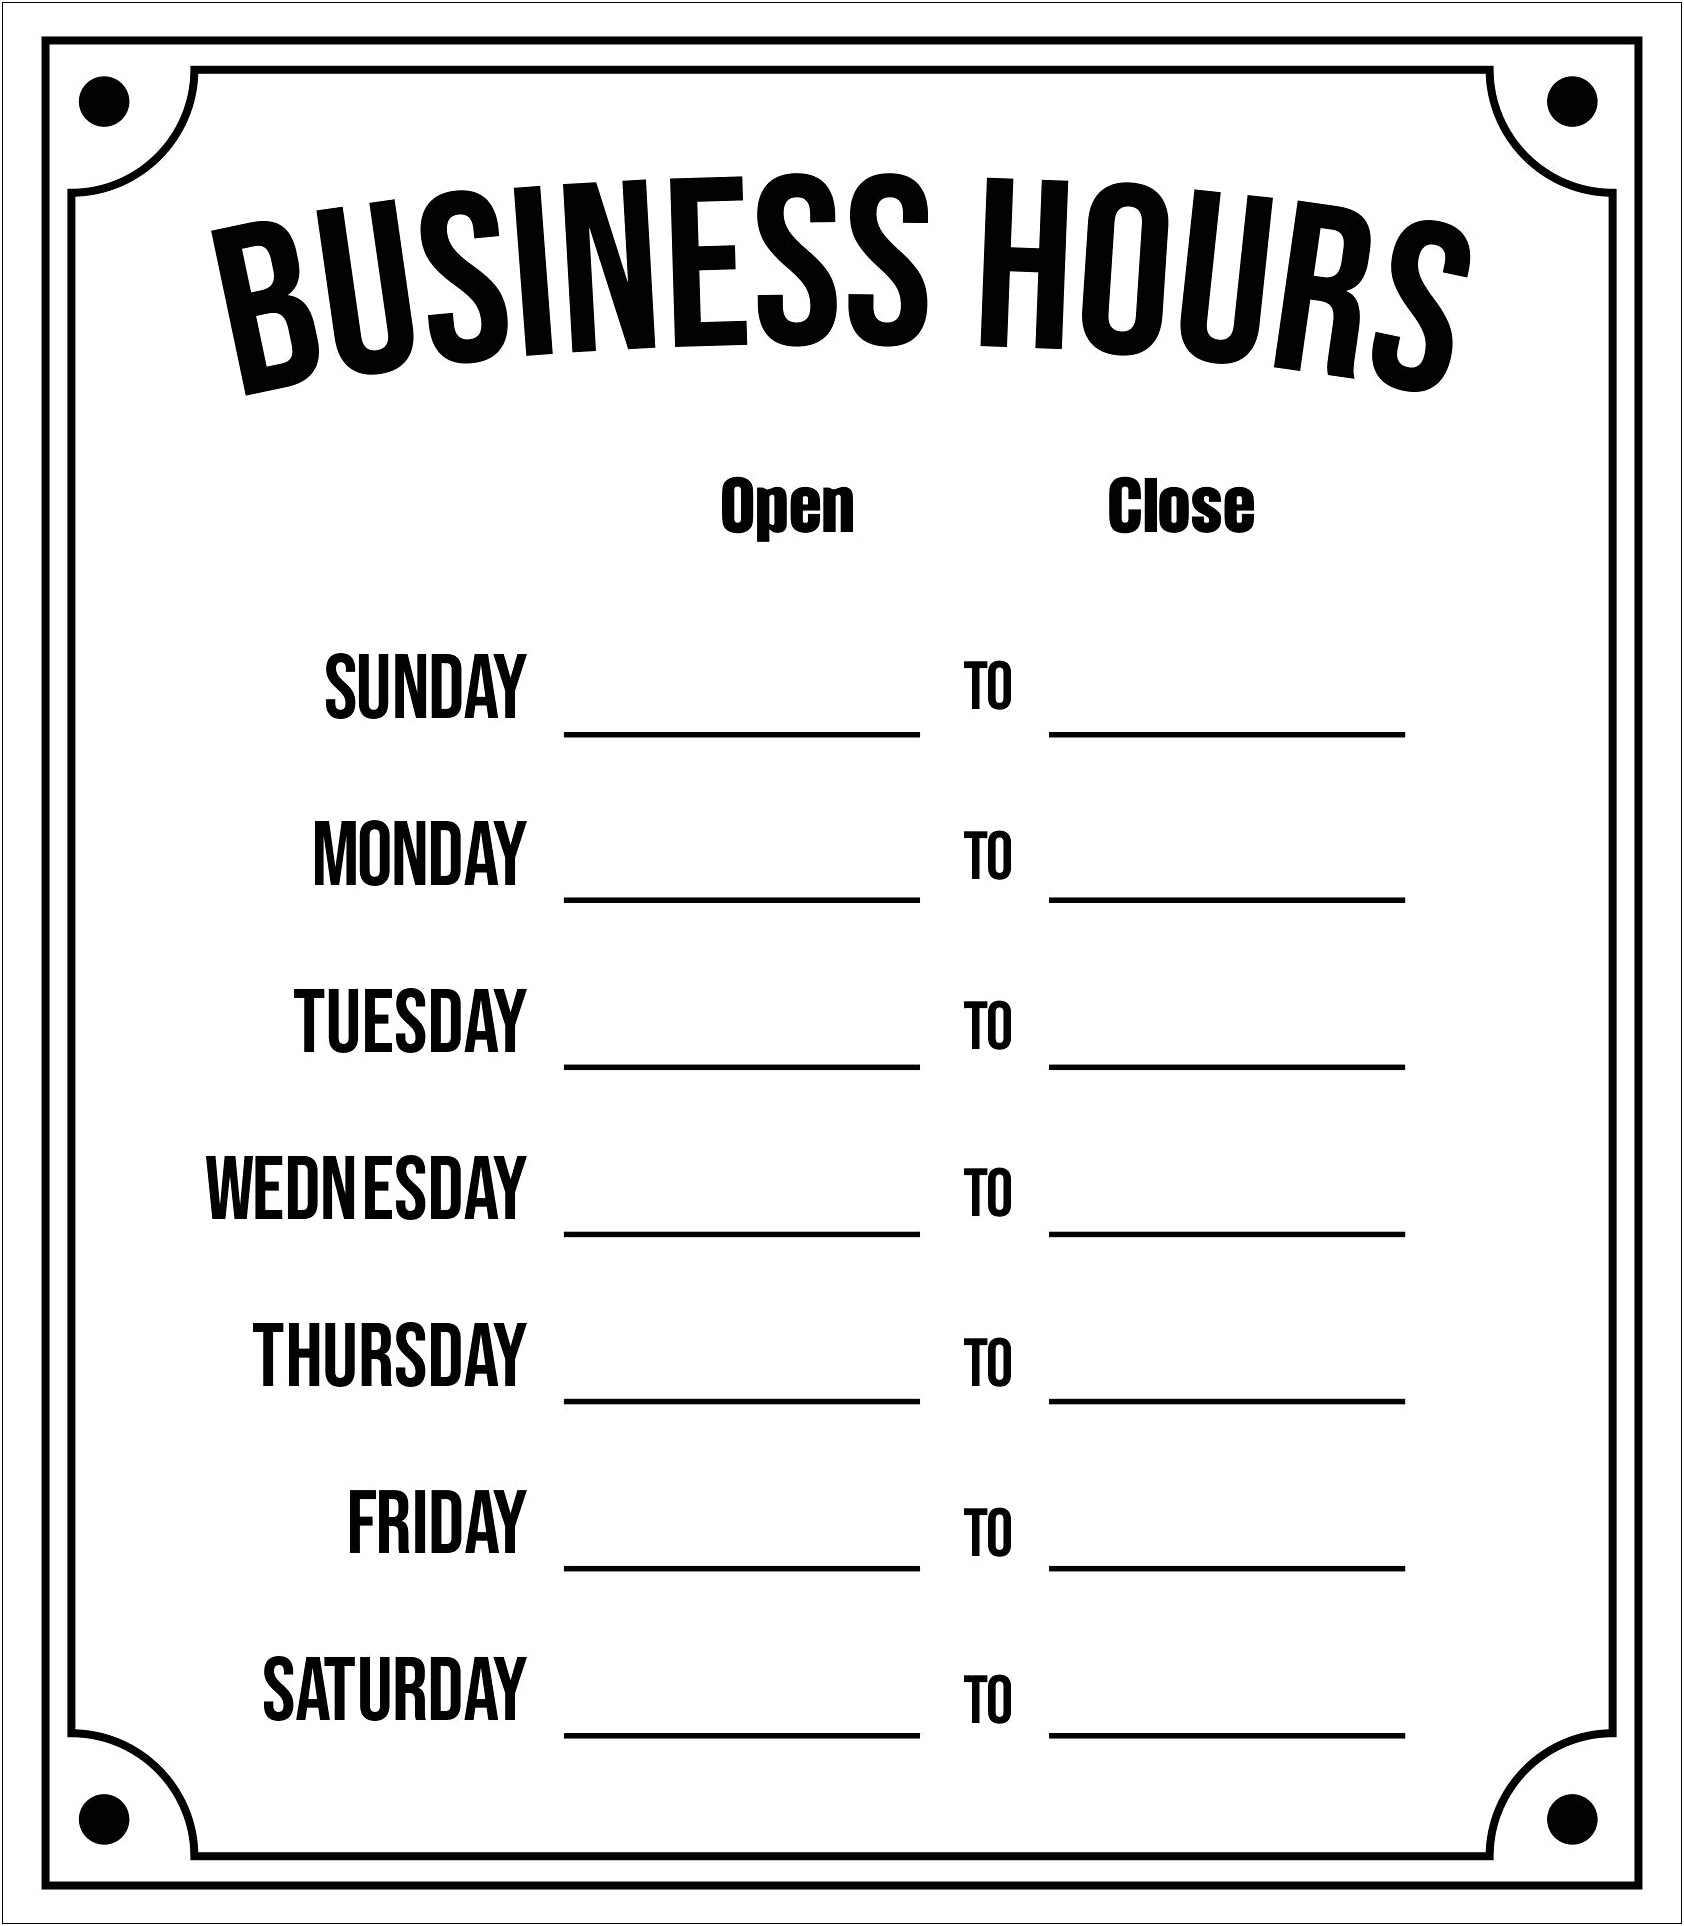 Open Hours Sign Template Free Word